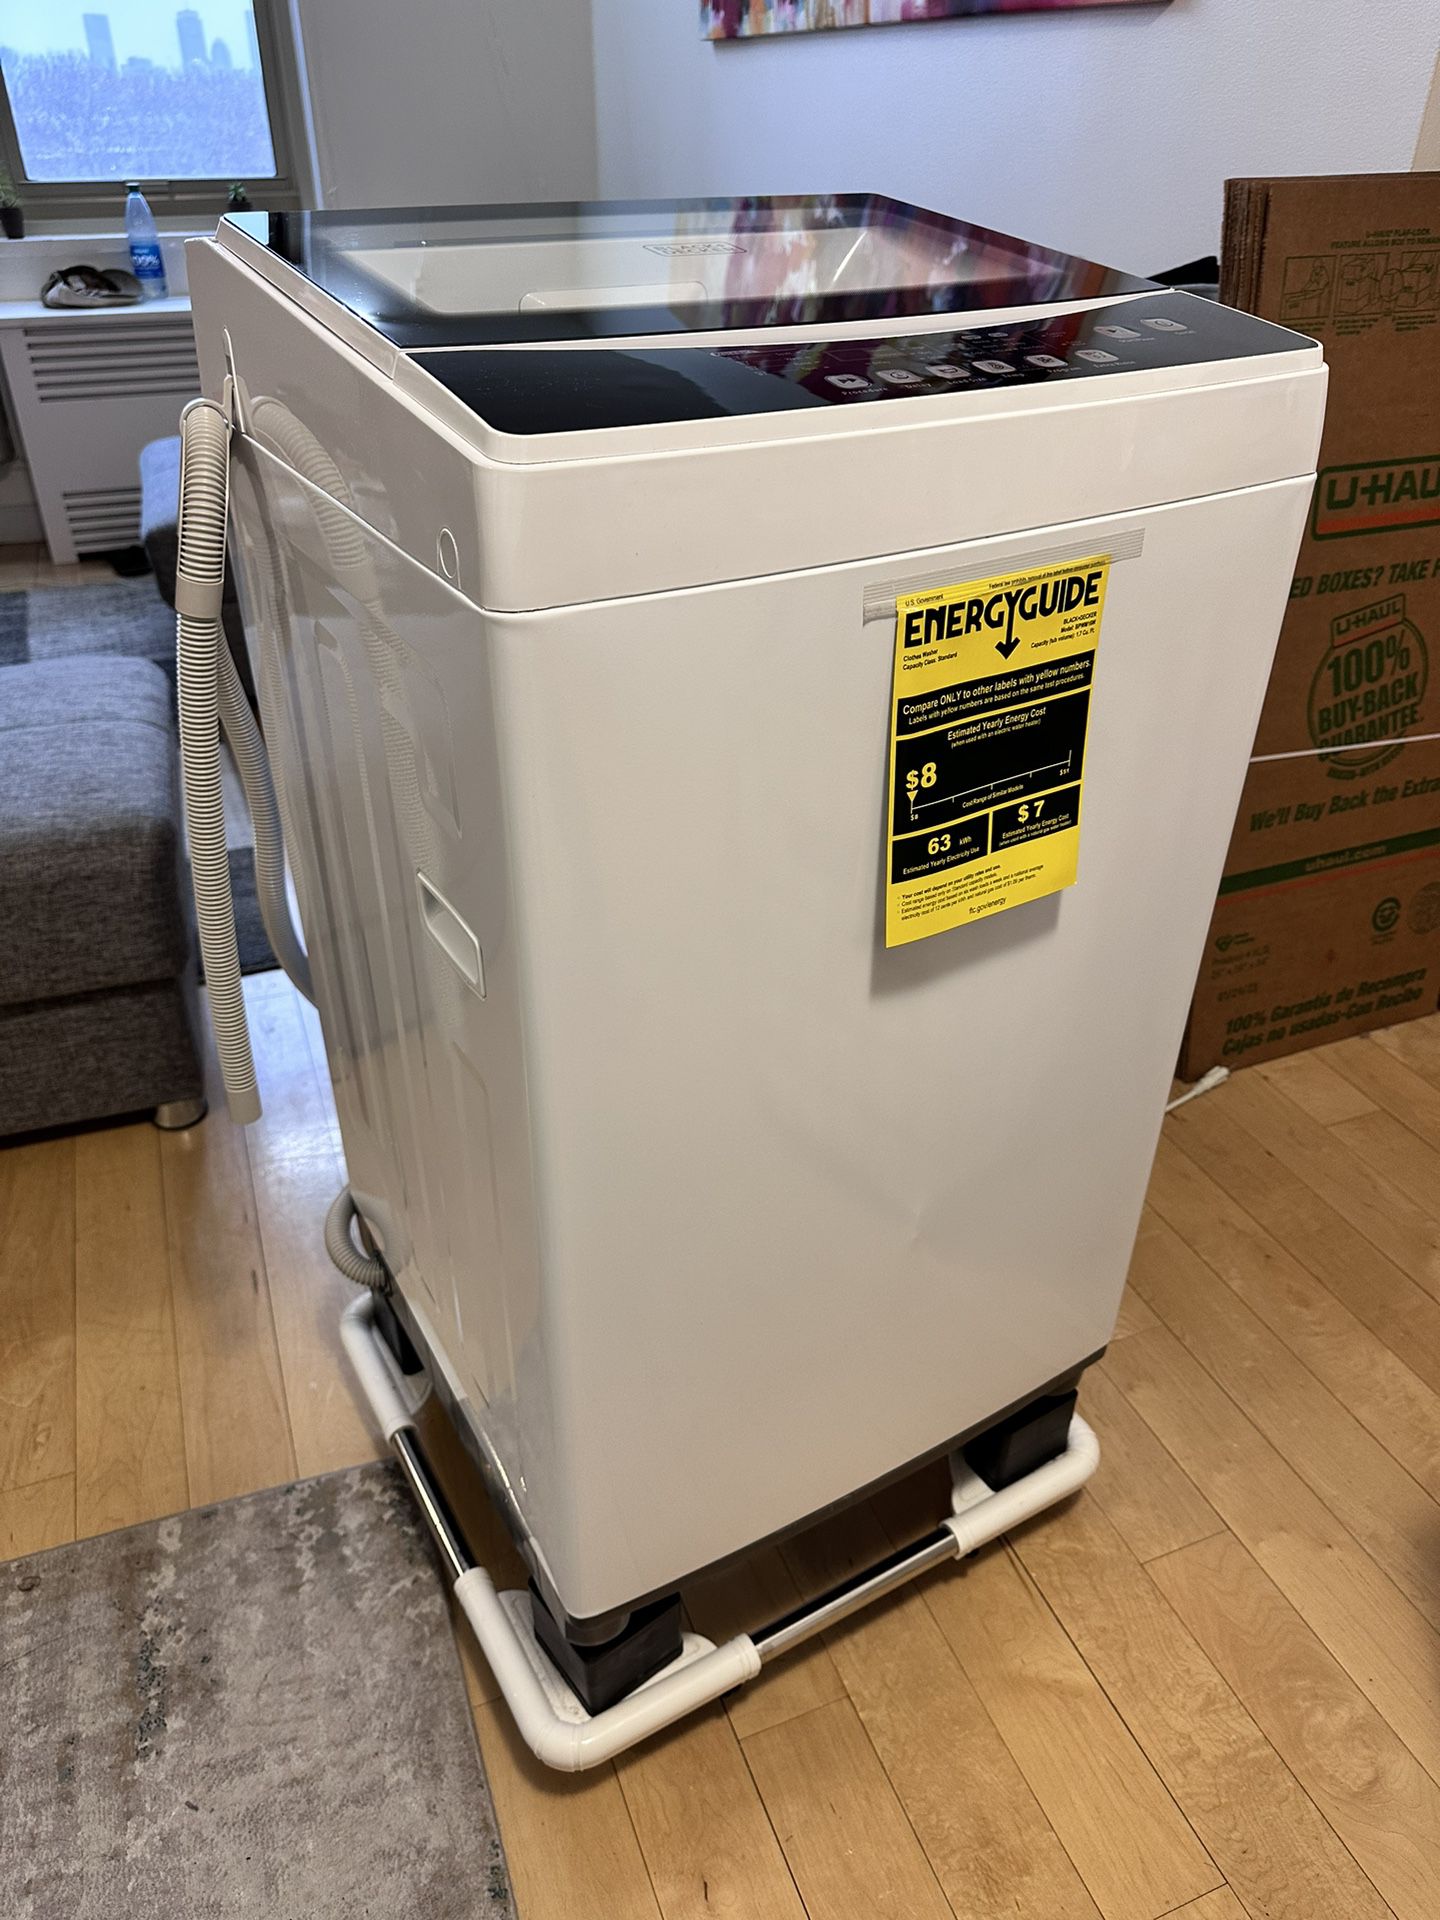 BRAND NEW Black+Decker Washing Machine for Sale in Queens, NY - OfferUp